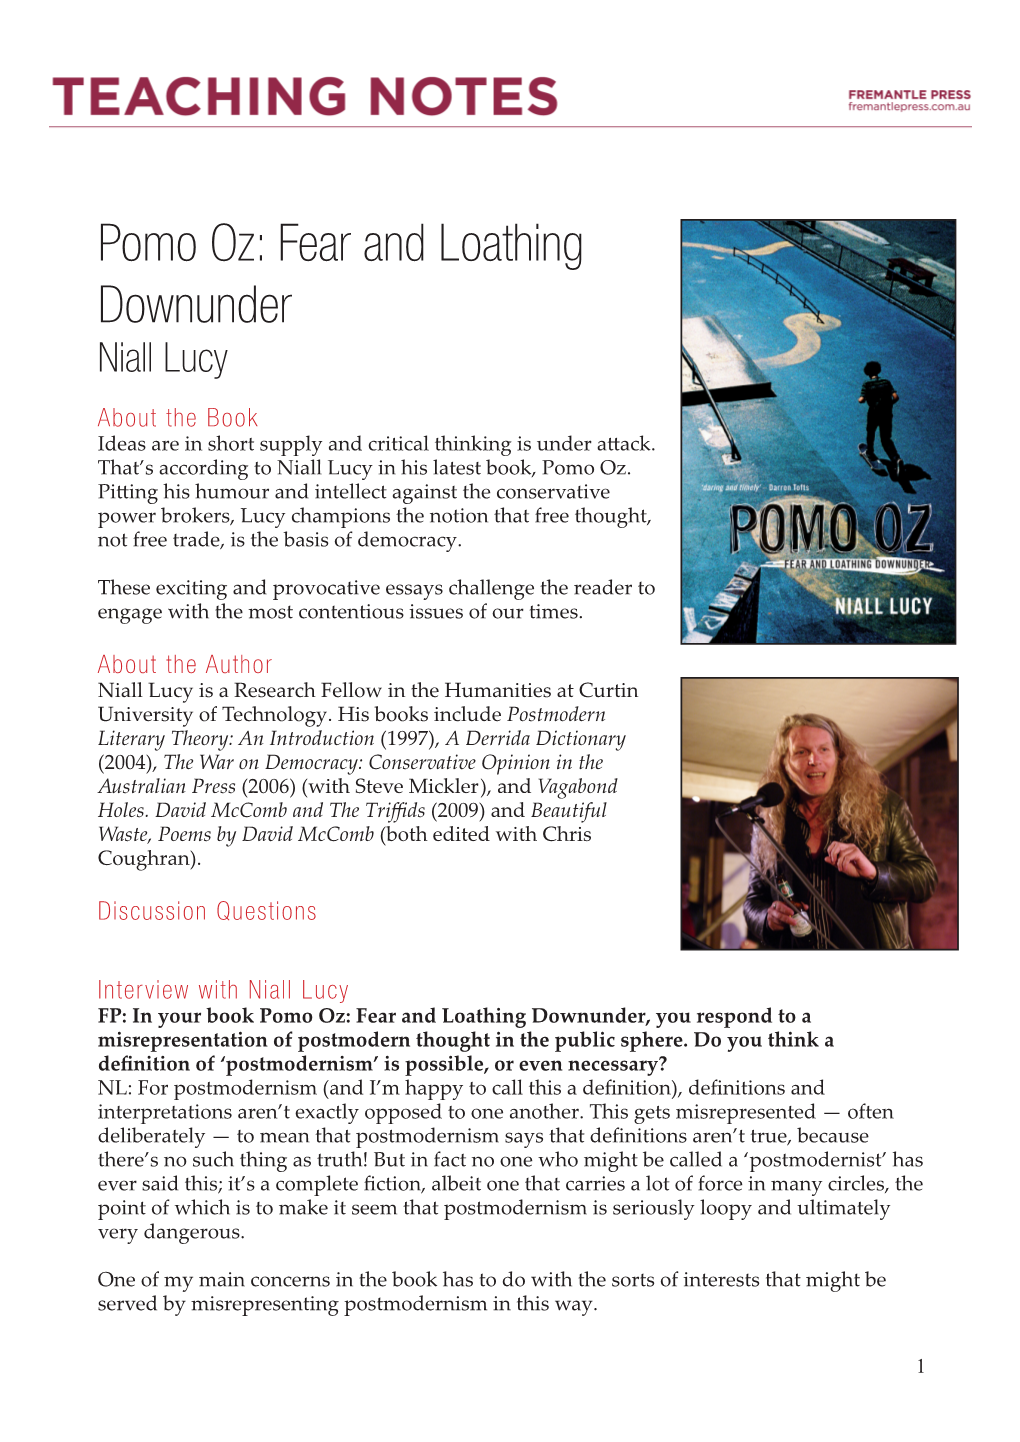 Pomo Oz: Fear and Loathing Downunder Niall Lucy